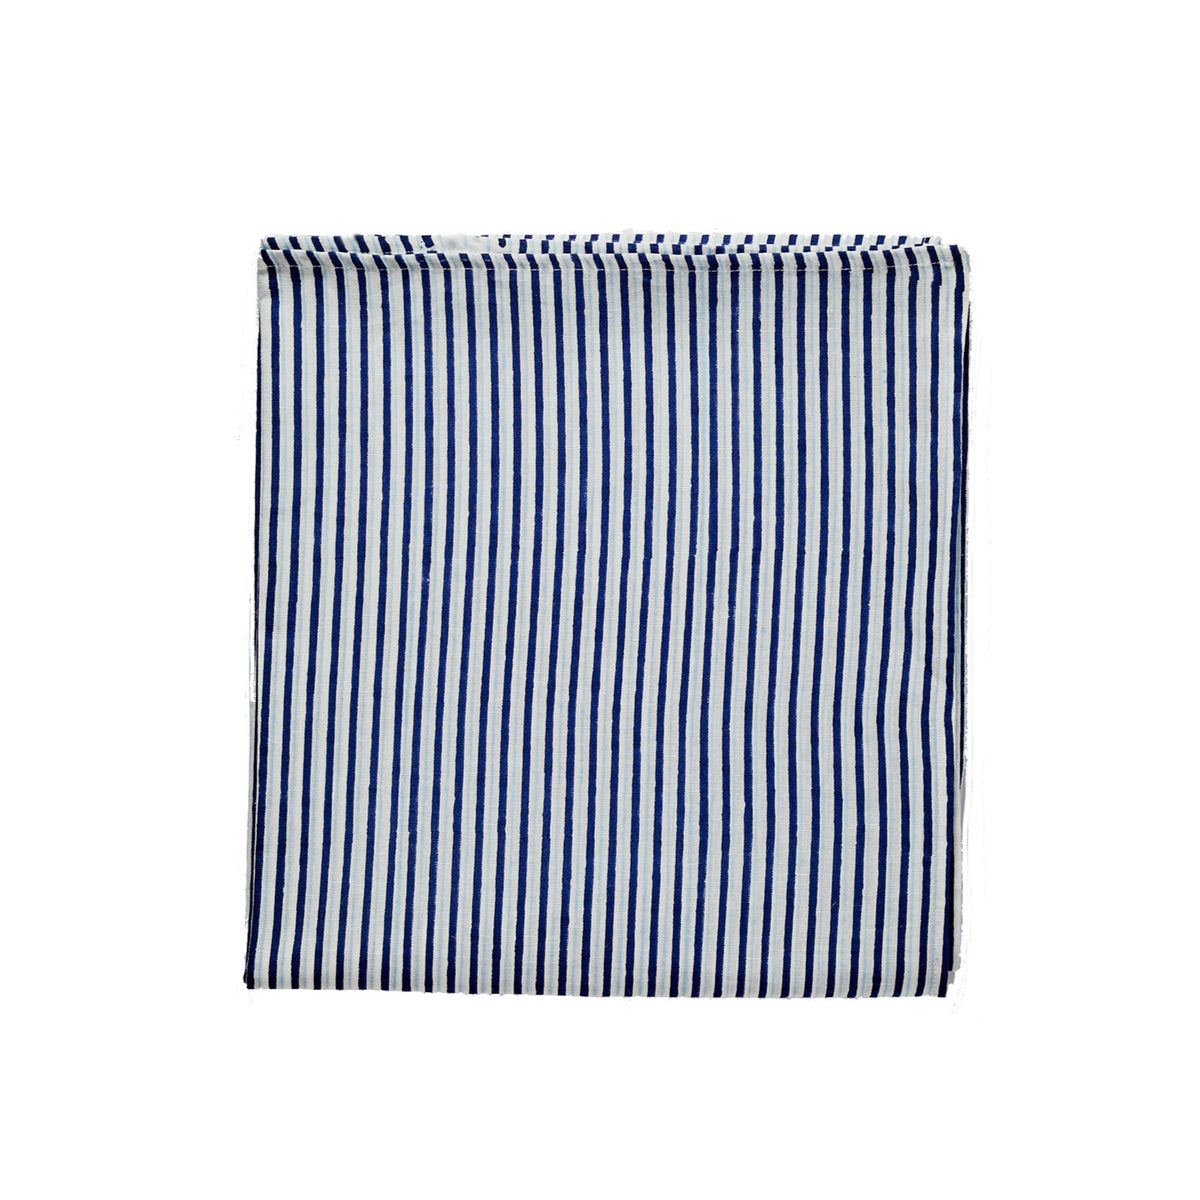 The Padstow Stripes Tablecloth